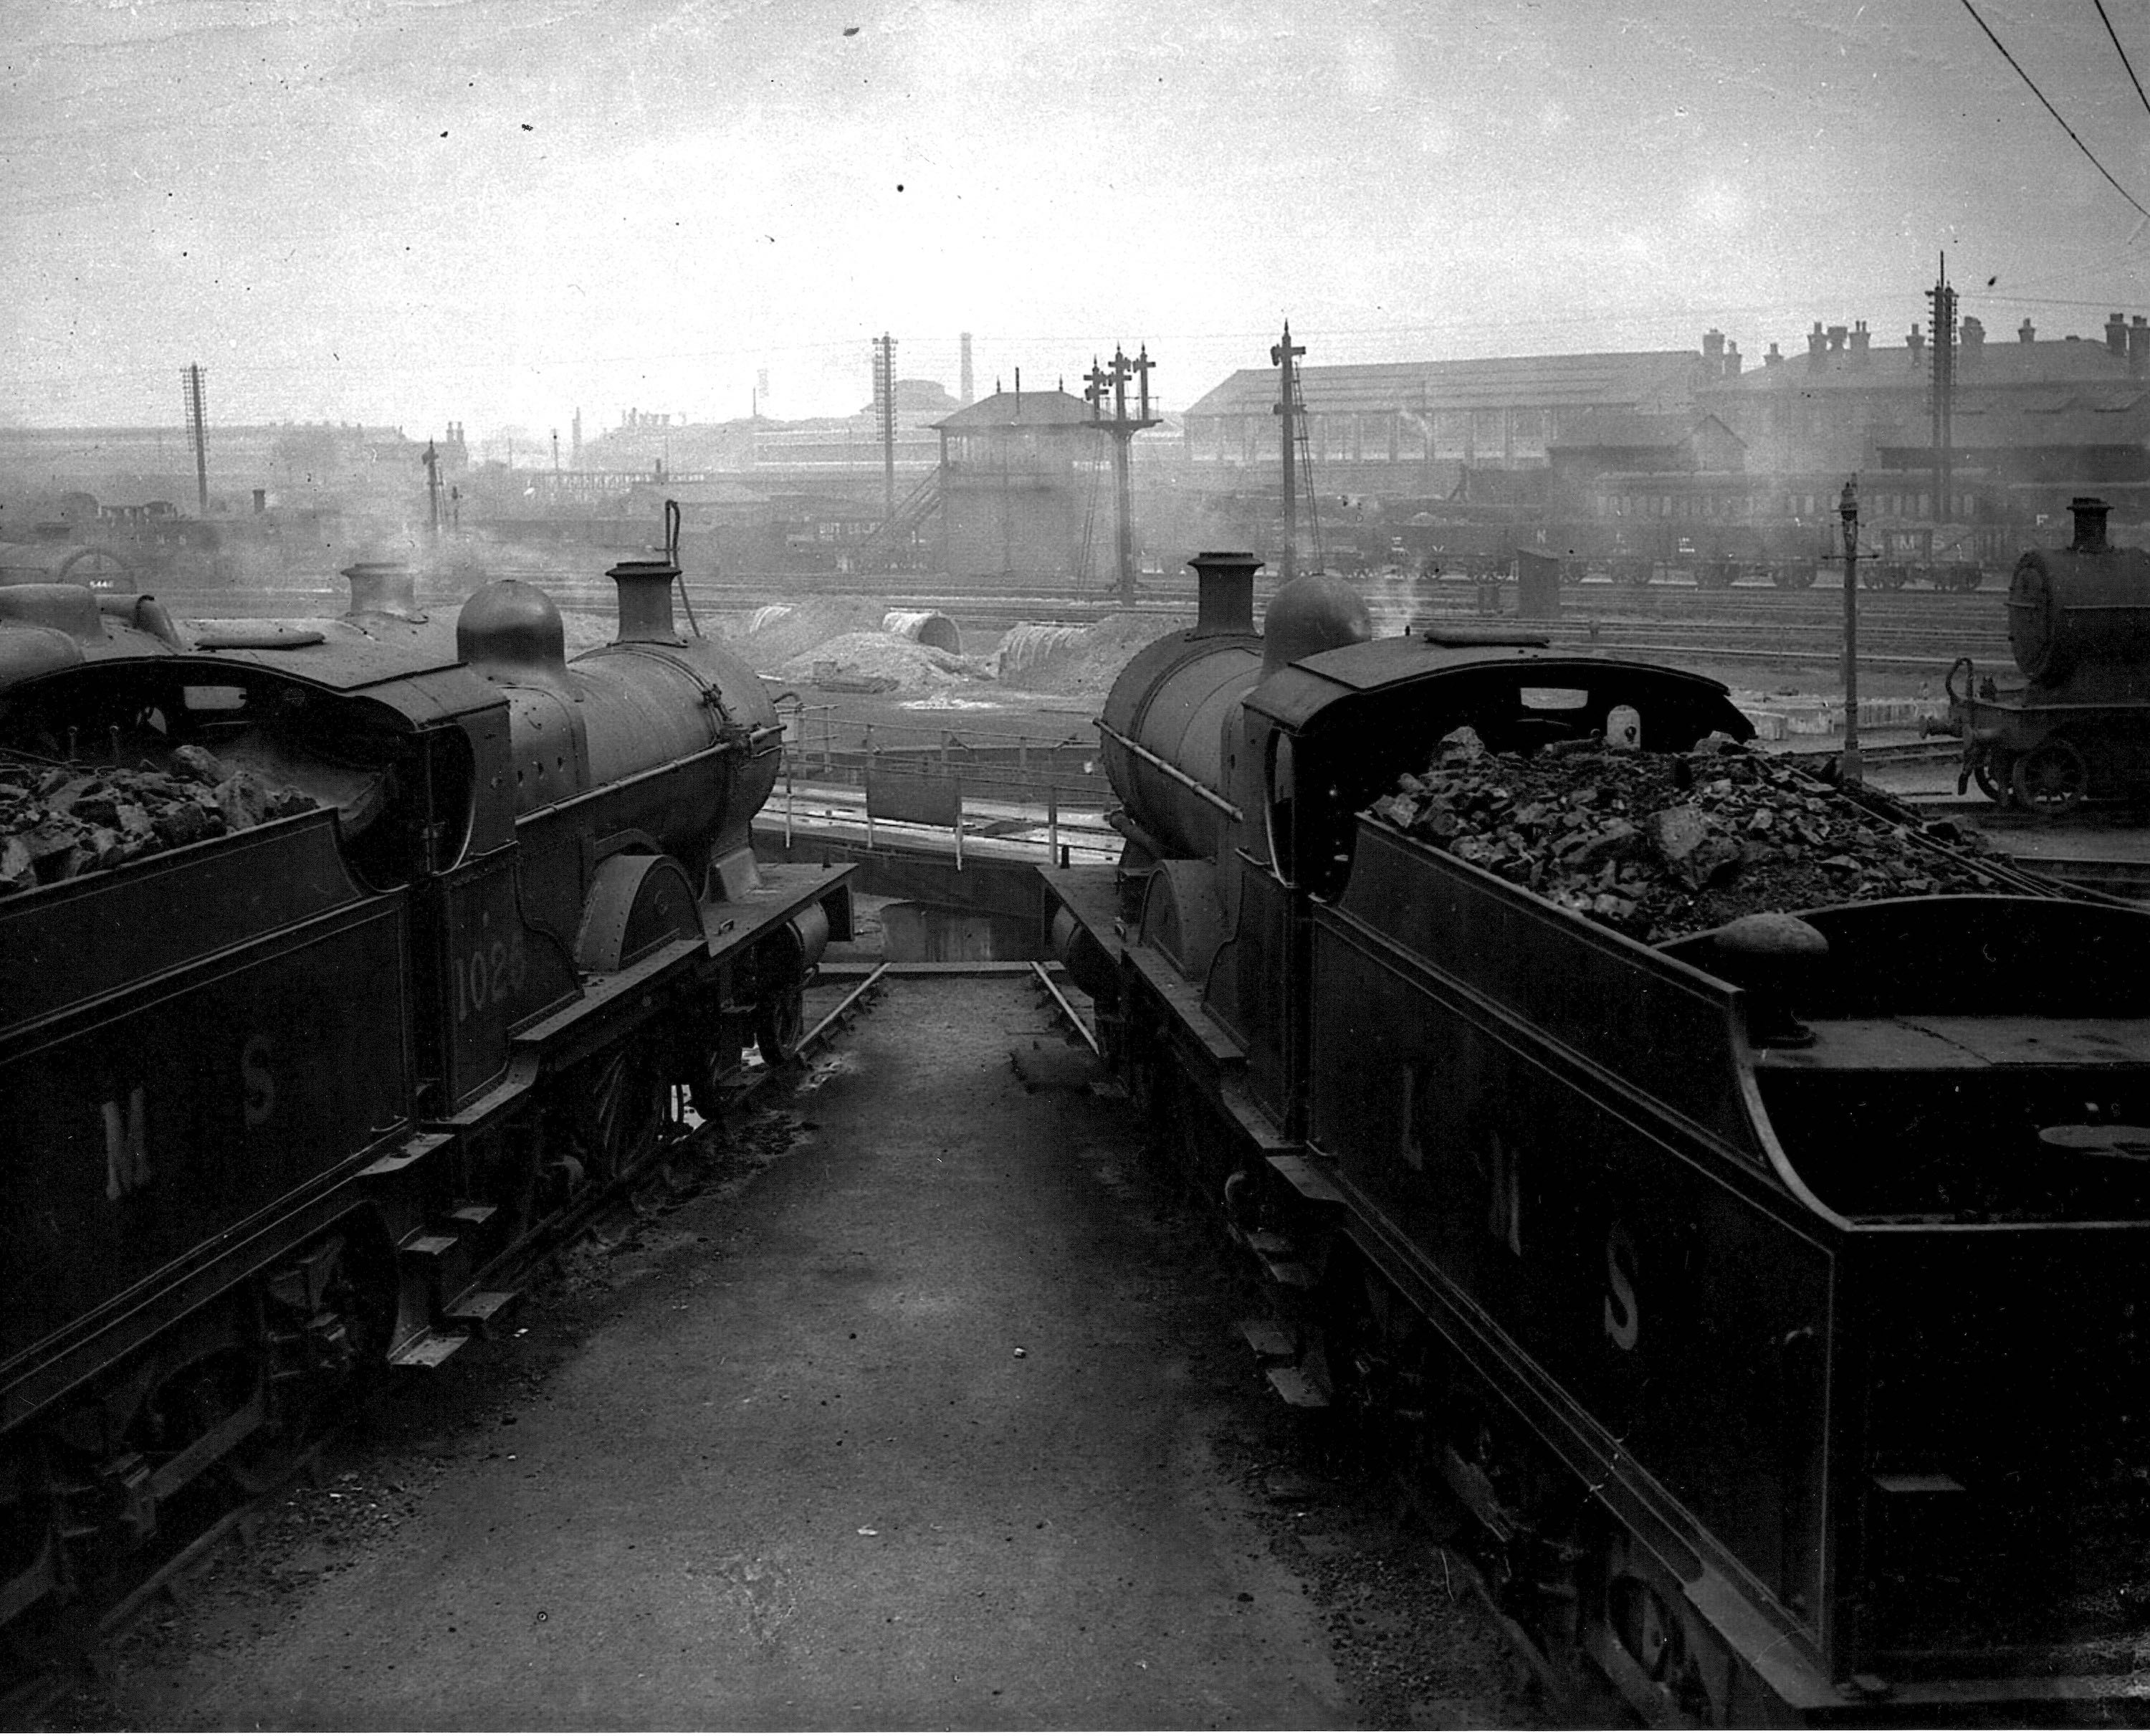 A photograph taken with two locomotives in the foreground stabled around a turntable at Derby's 'Four Shed'. We are looking over to Way & Works signal box with air raid shelters being contructed in the middle-distance. The LMS research laboratories on London Road are visible in the background.